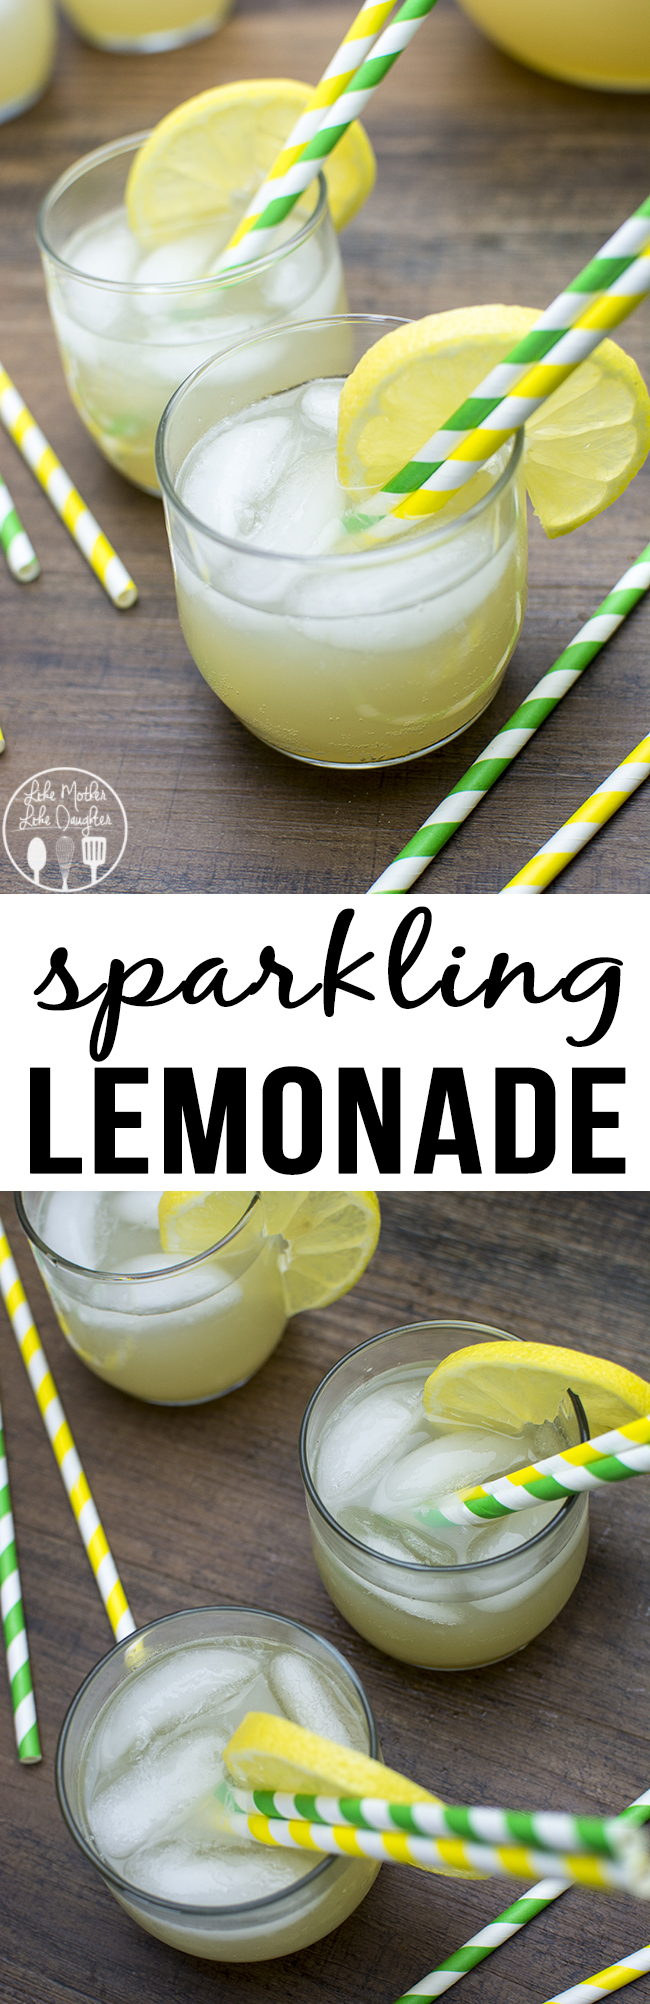 Sparkling Lemonade - This easy to make sparkling lemonade is only 2 ingredients and is the perfect refreshing bubbly drink for any occasion